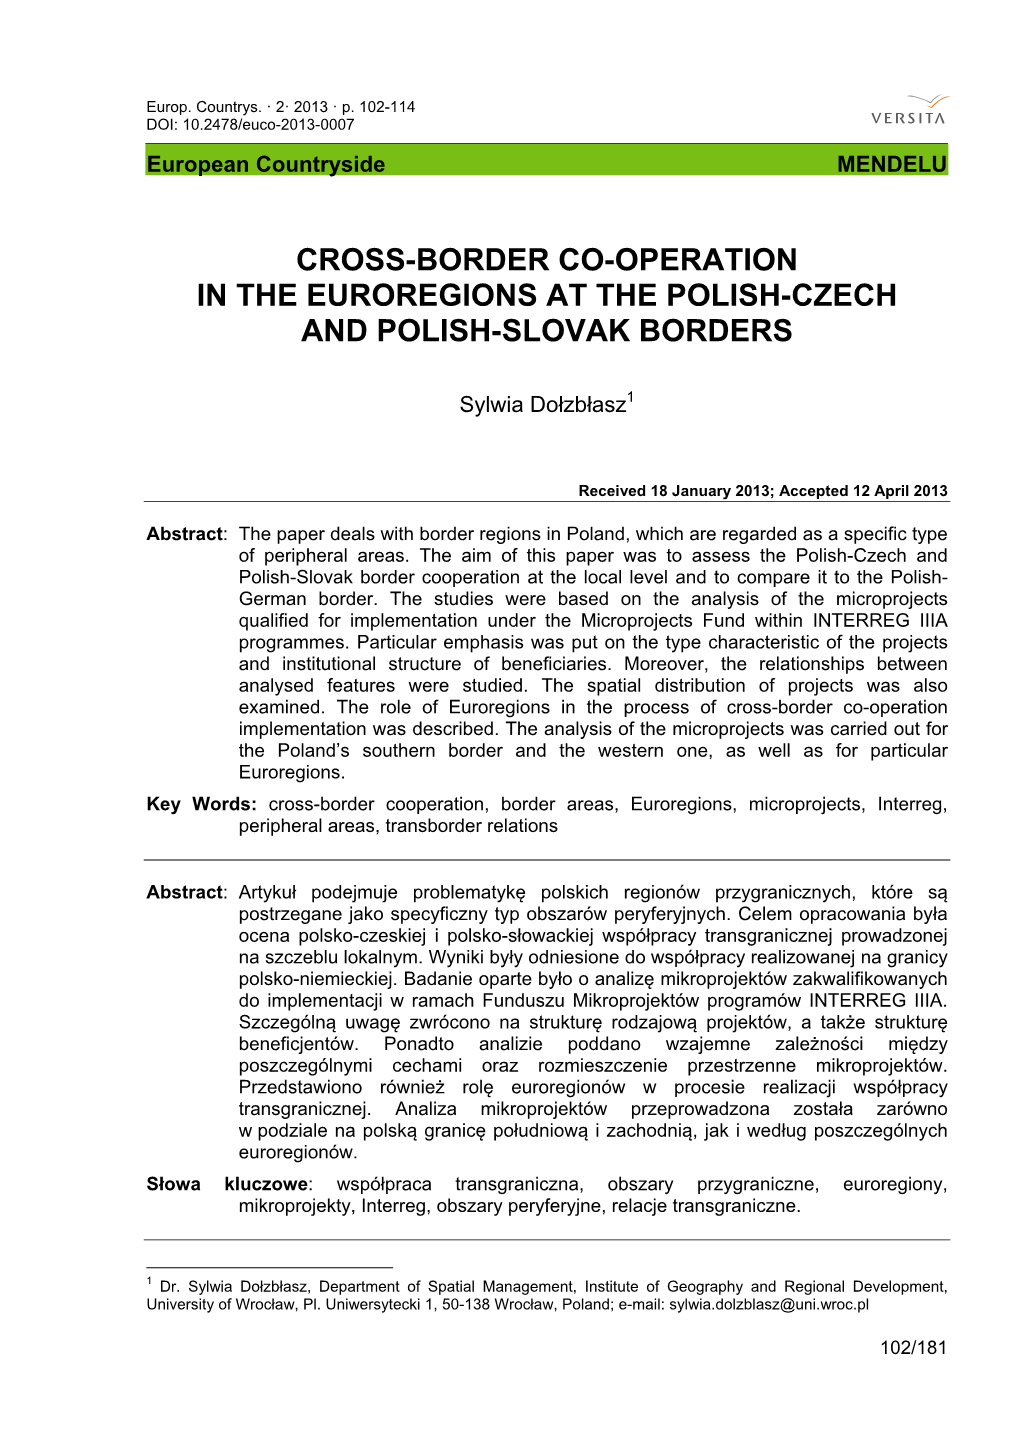 Cross-Border Co-Operation in the Euroregions at the Polish-Czech and Polish-Slovak Borders